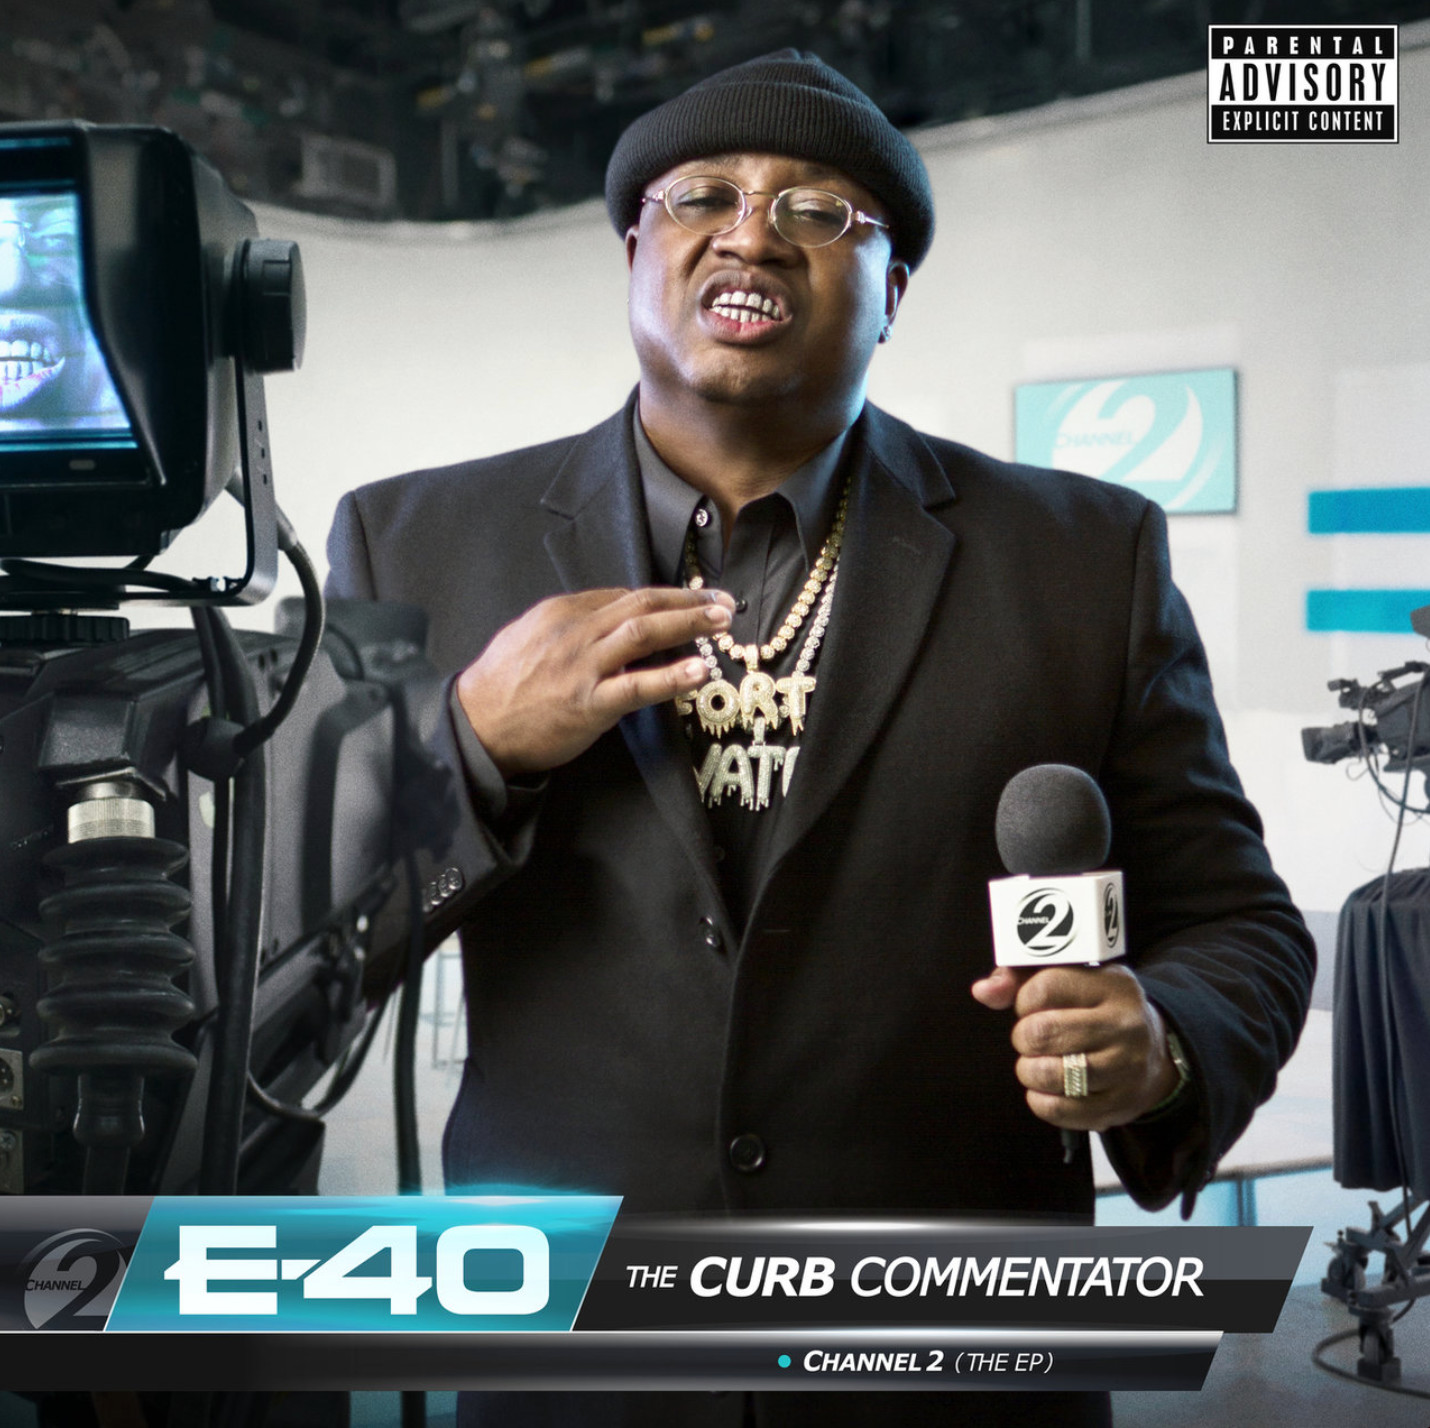 E-40 Keeps It Moving With New EP “The Curb Commentator Channel 2”